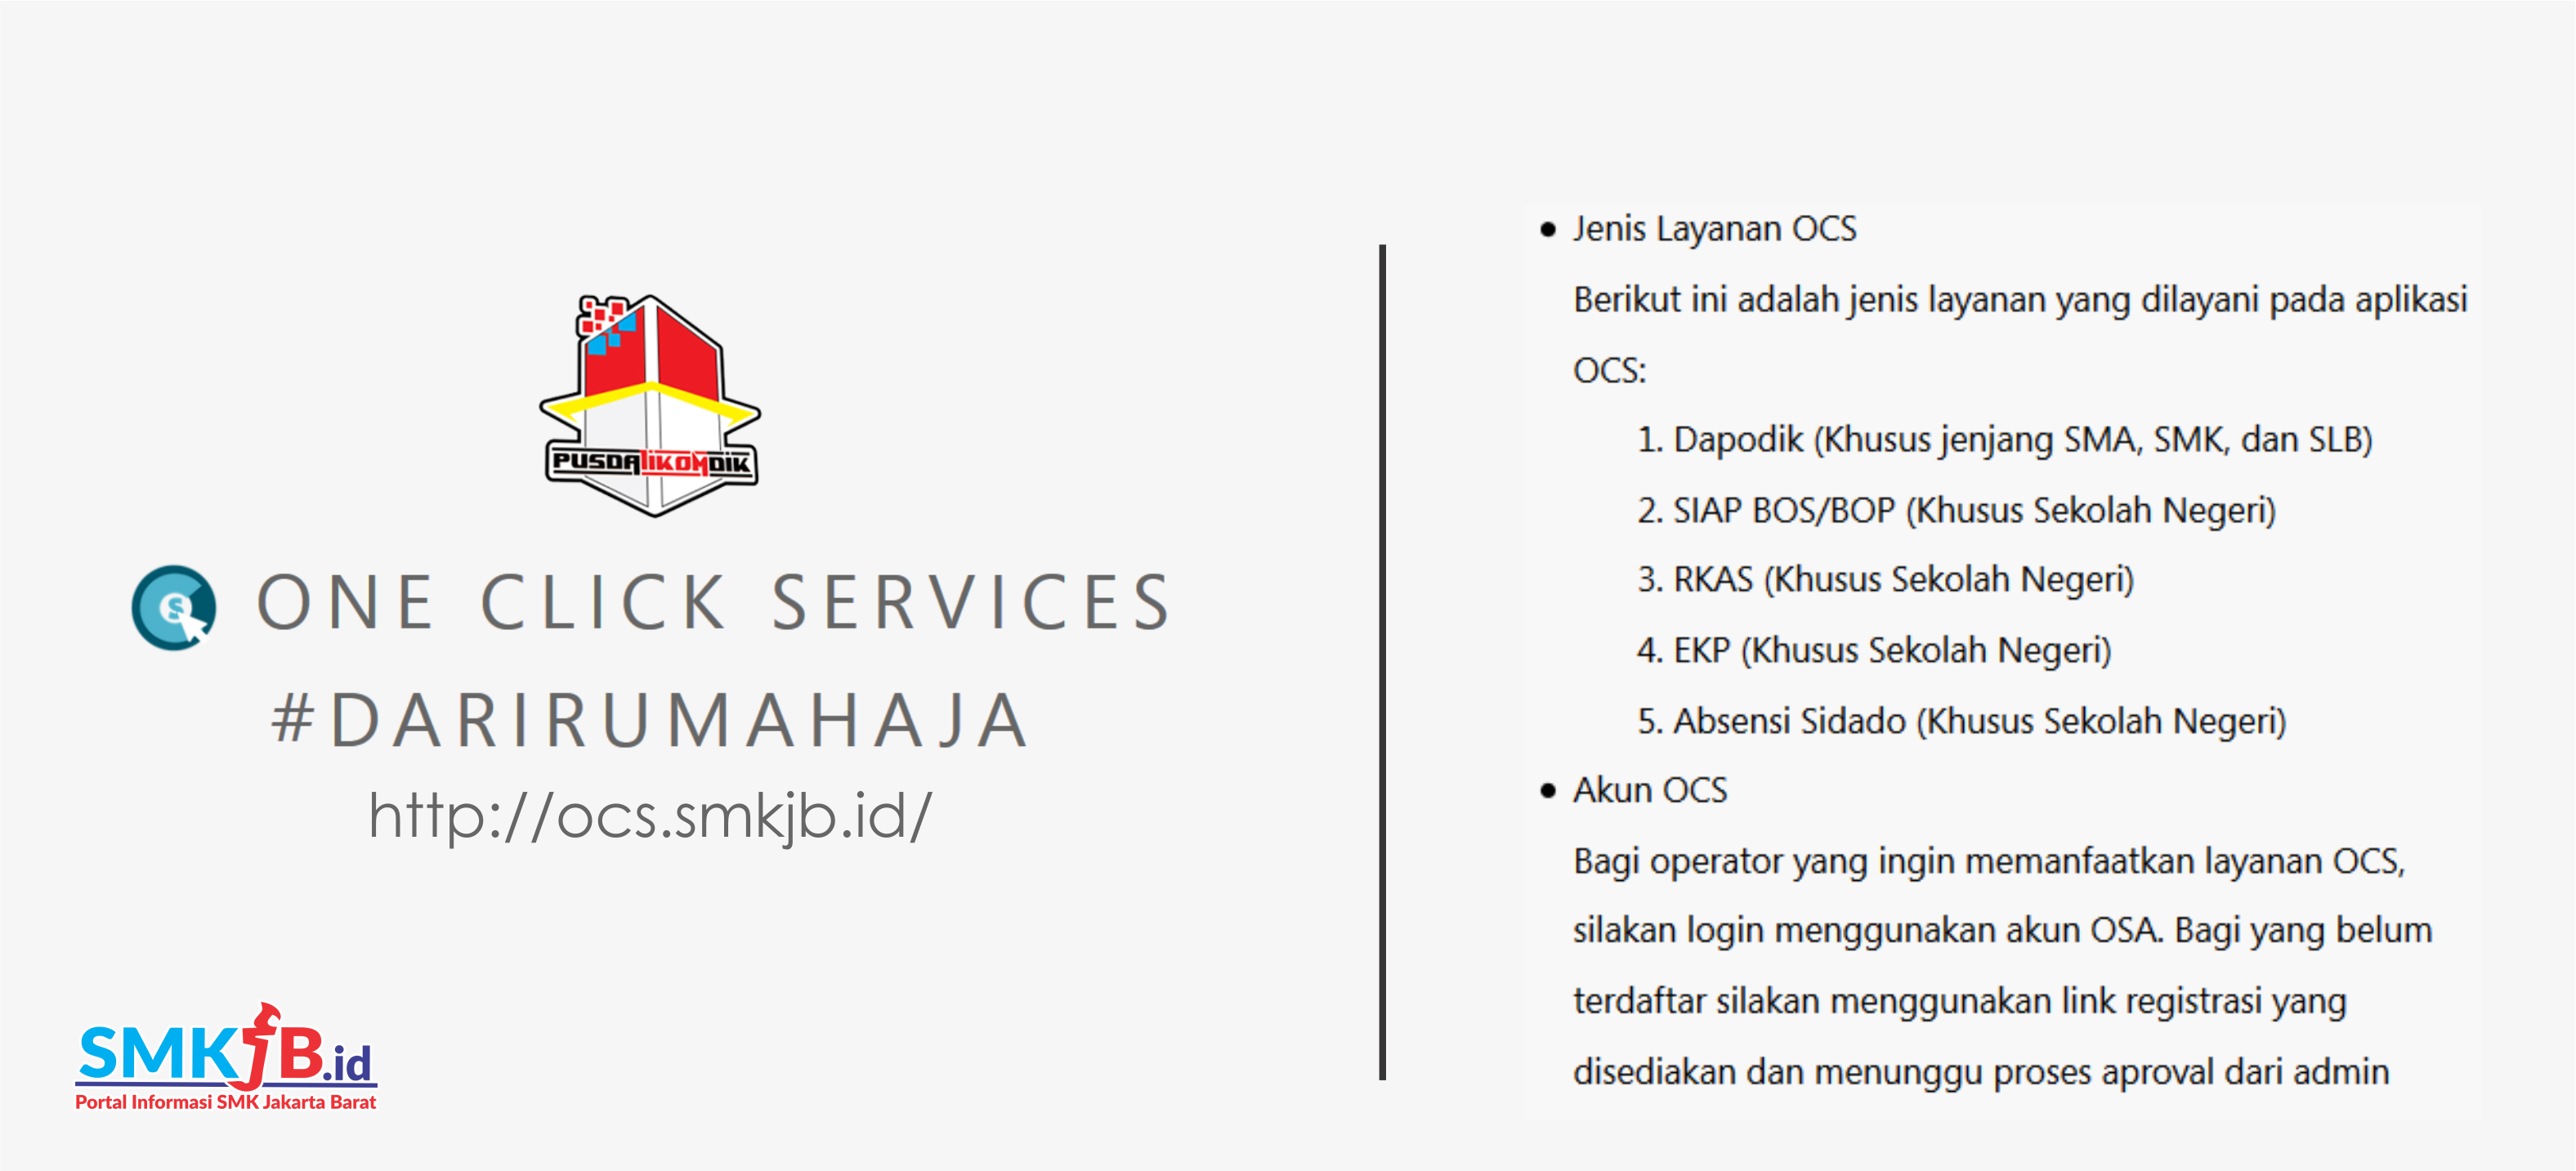 One Click Services